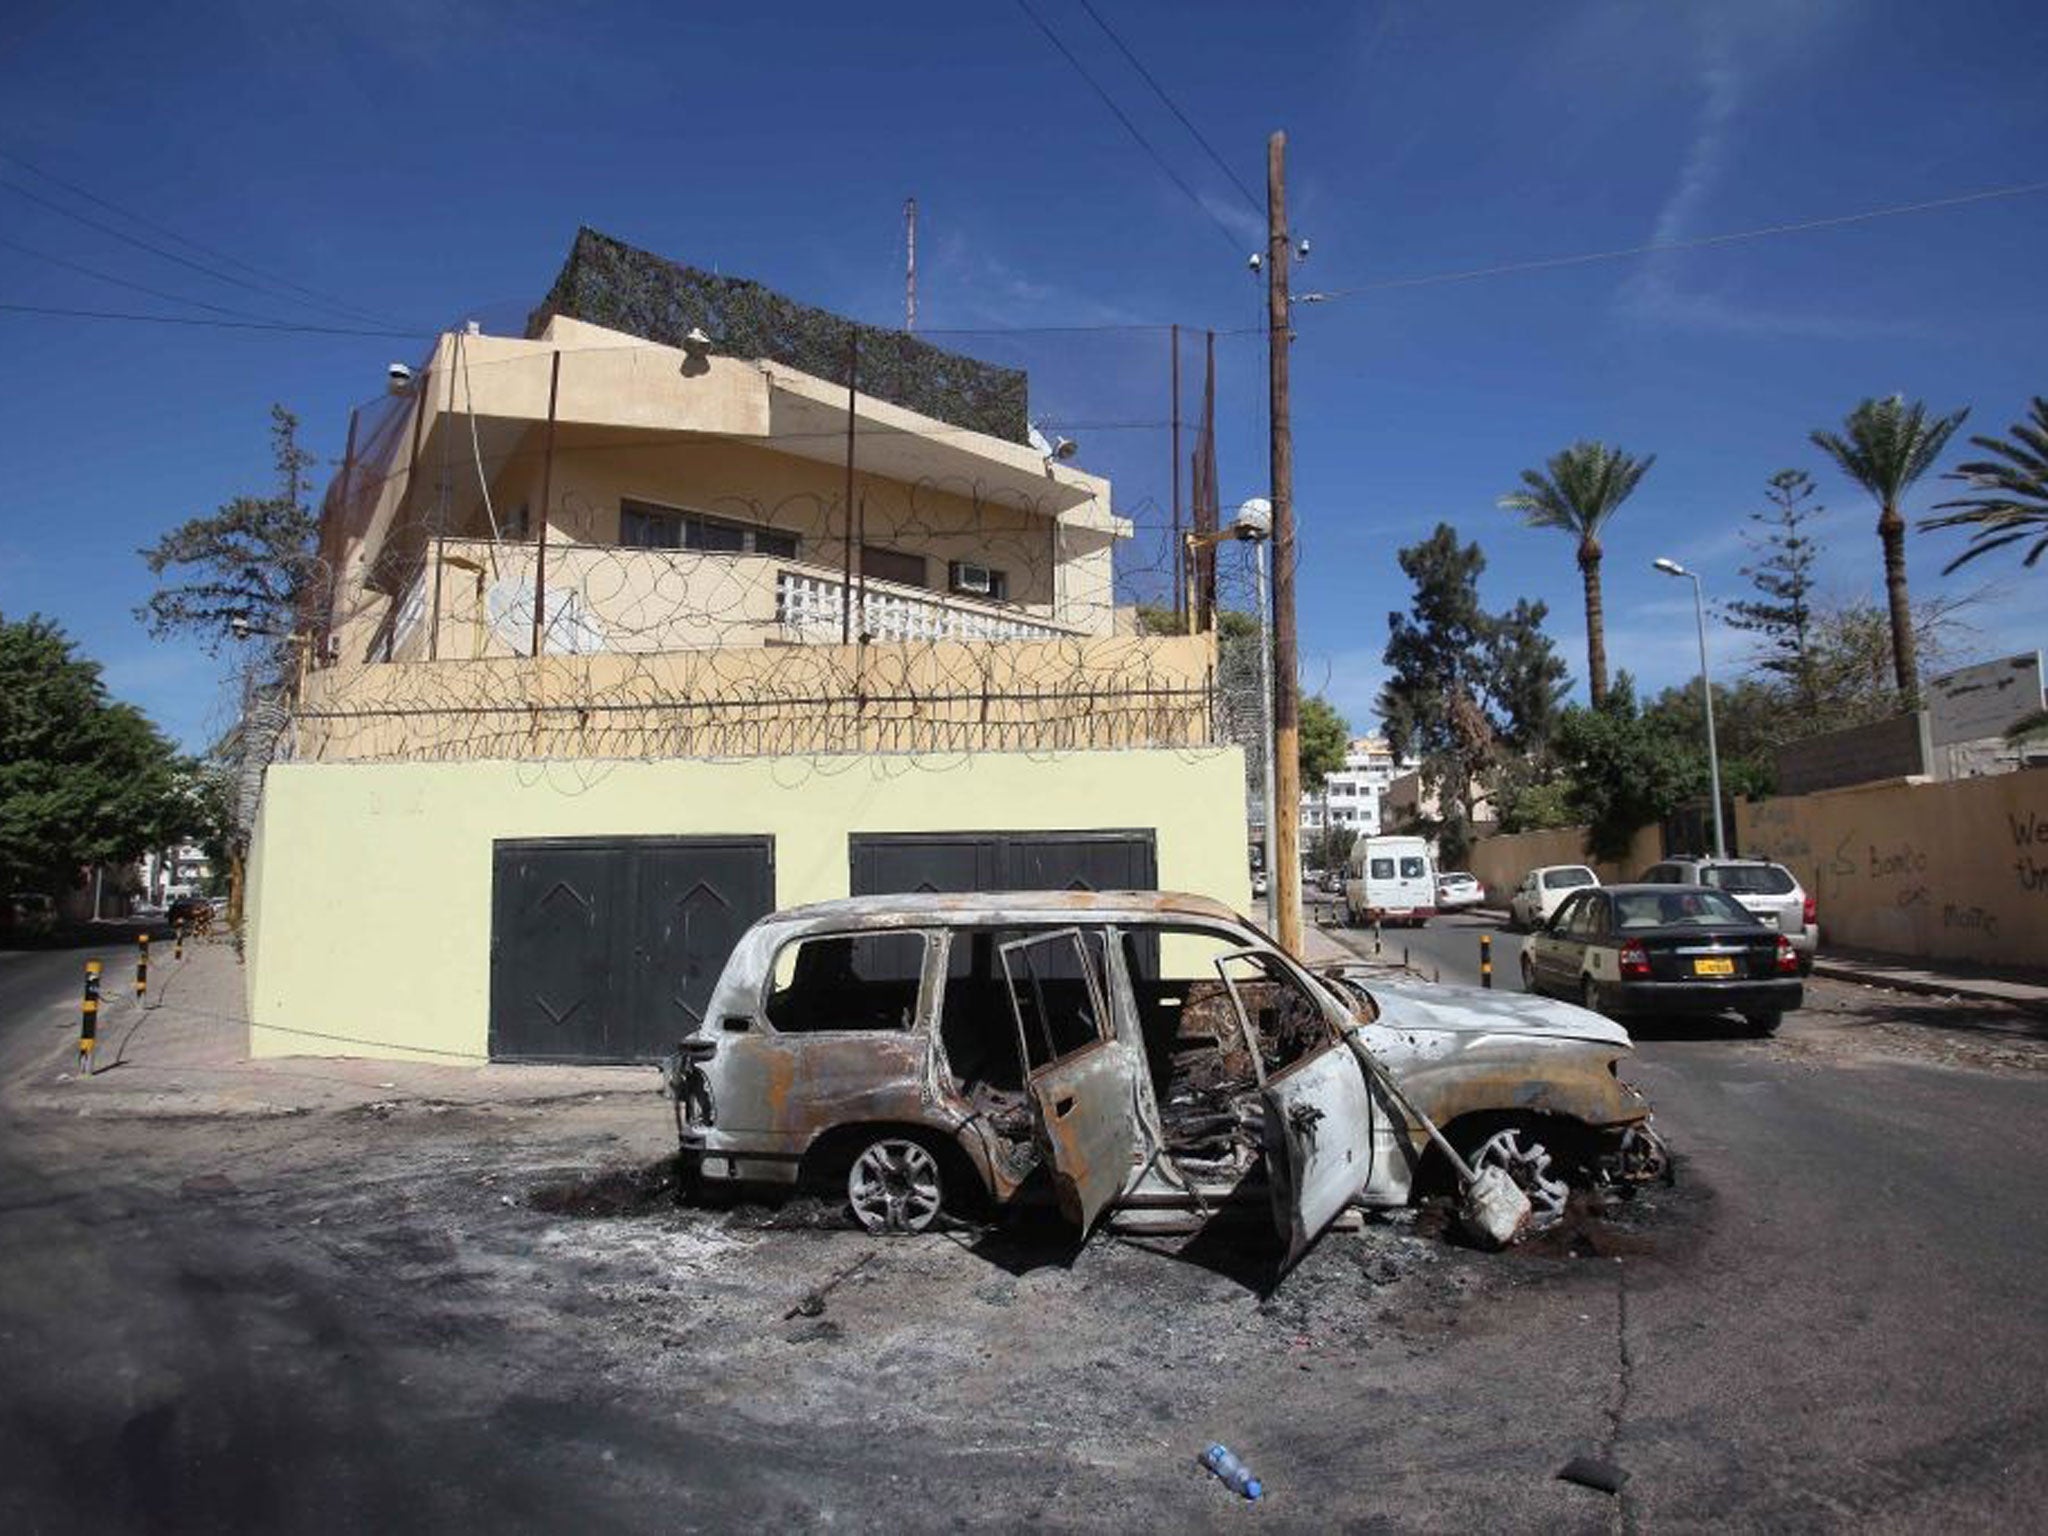 Russia has evacuated its diplomats from Libya after its embassy in Tripoli was attacked yesterday by a mob of gunmen